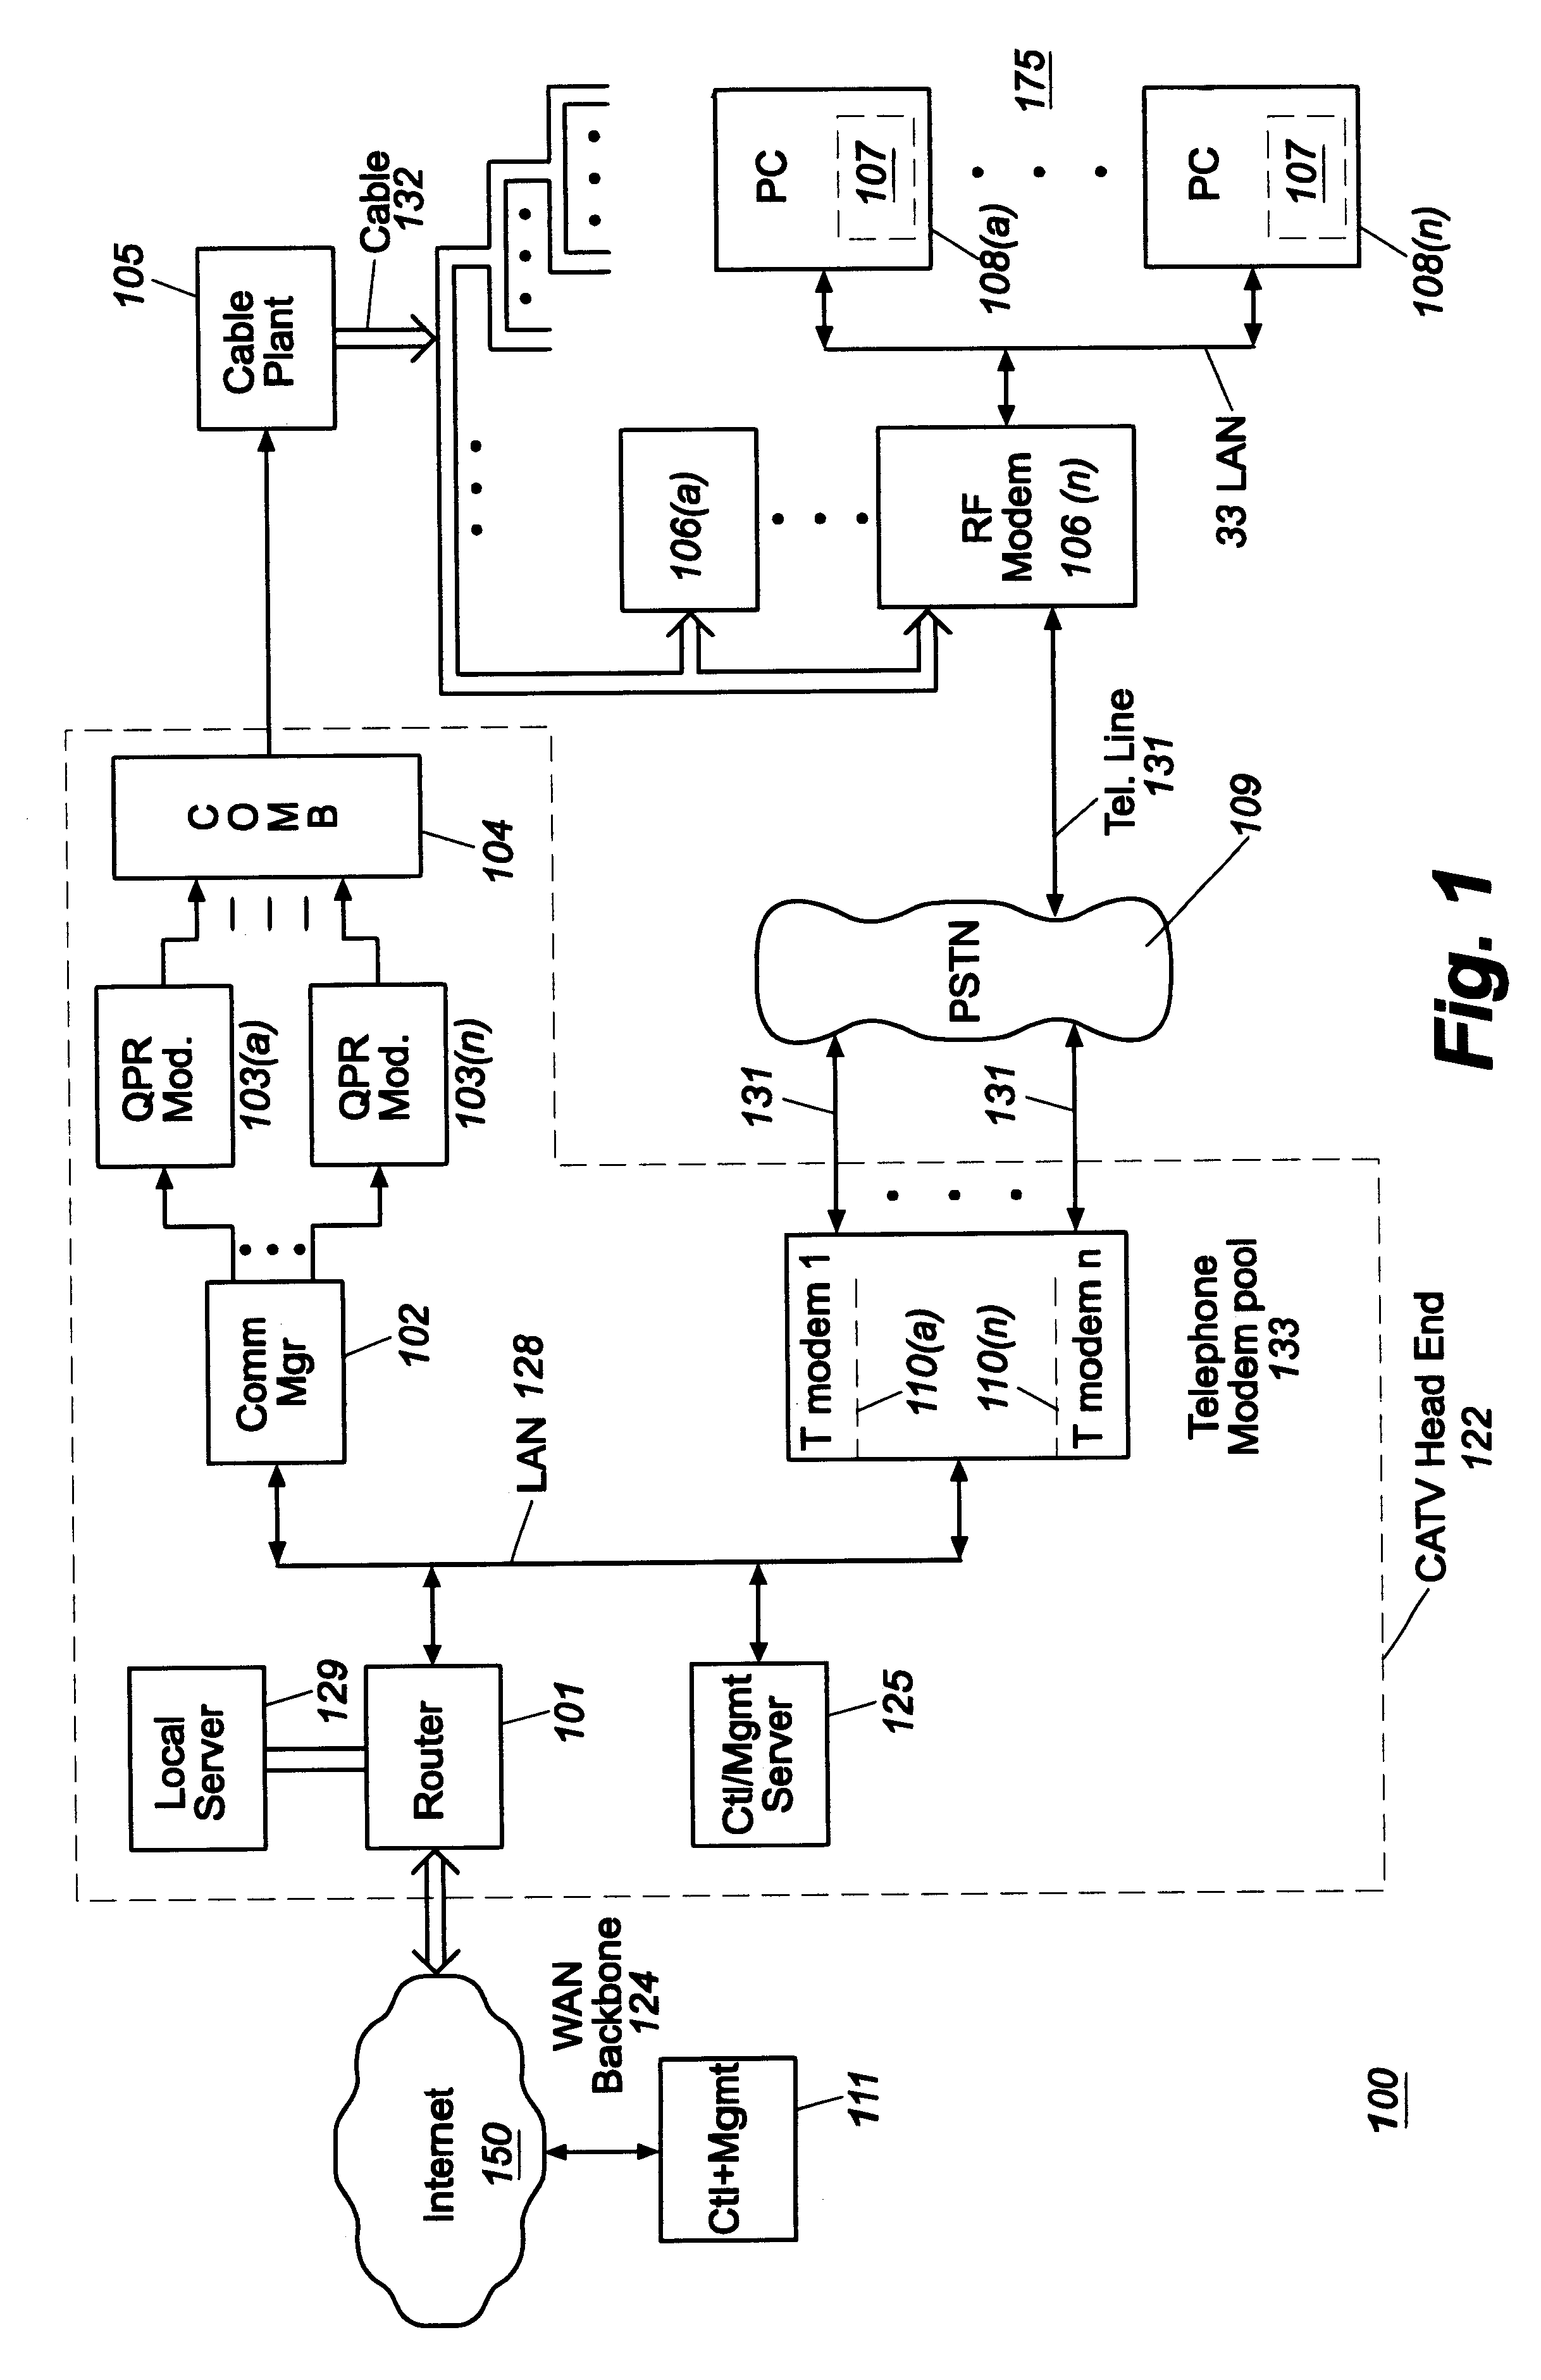 Cable modem map display for network management of a cable data delivery system